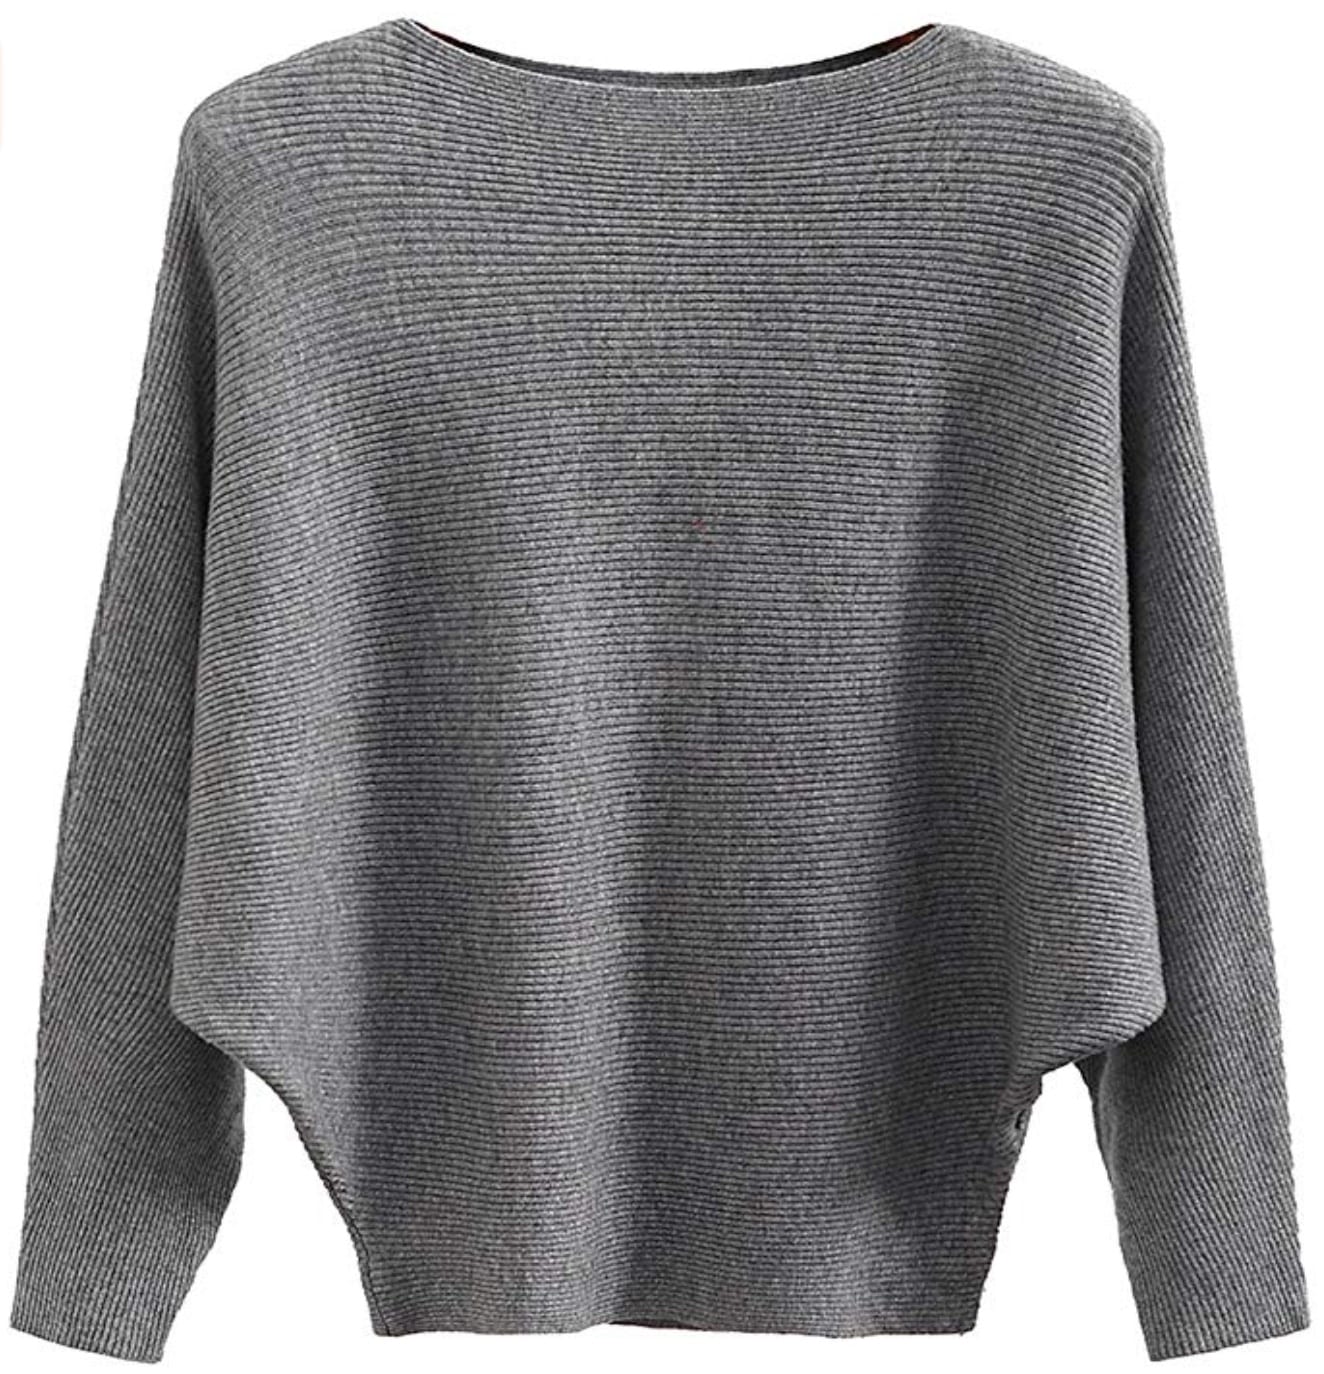 One Size Batwing Sleeve Sweater